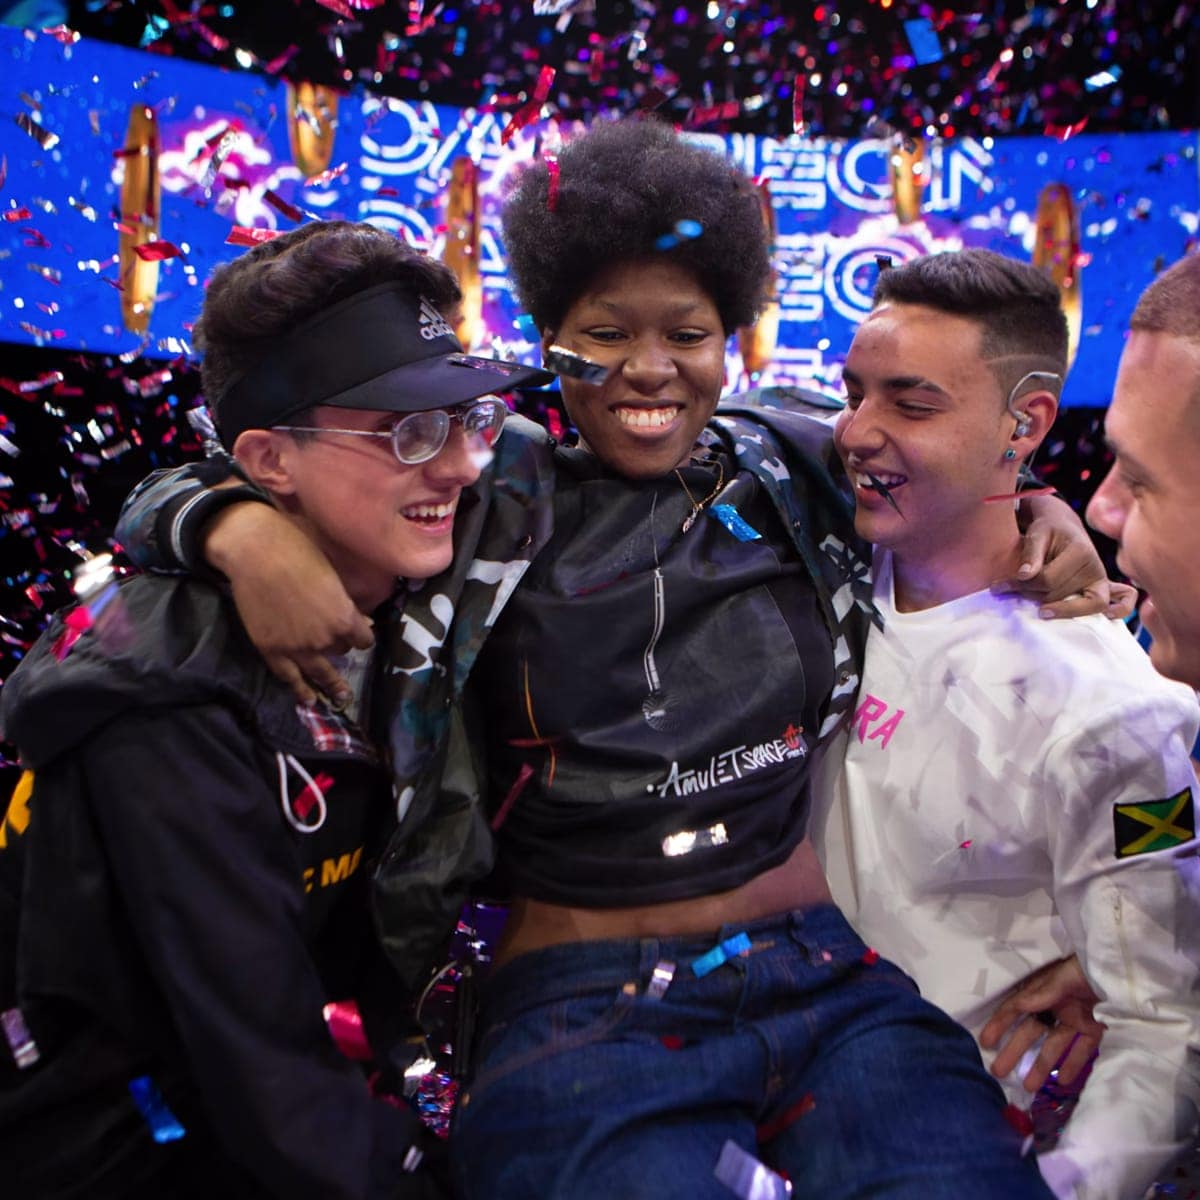 Colombia’s Marithea is the only female rapper fighting for the crown at the Red Bull Batalla World Final 2021